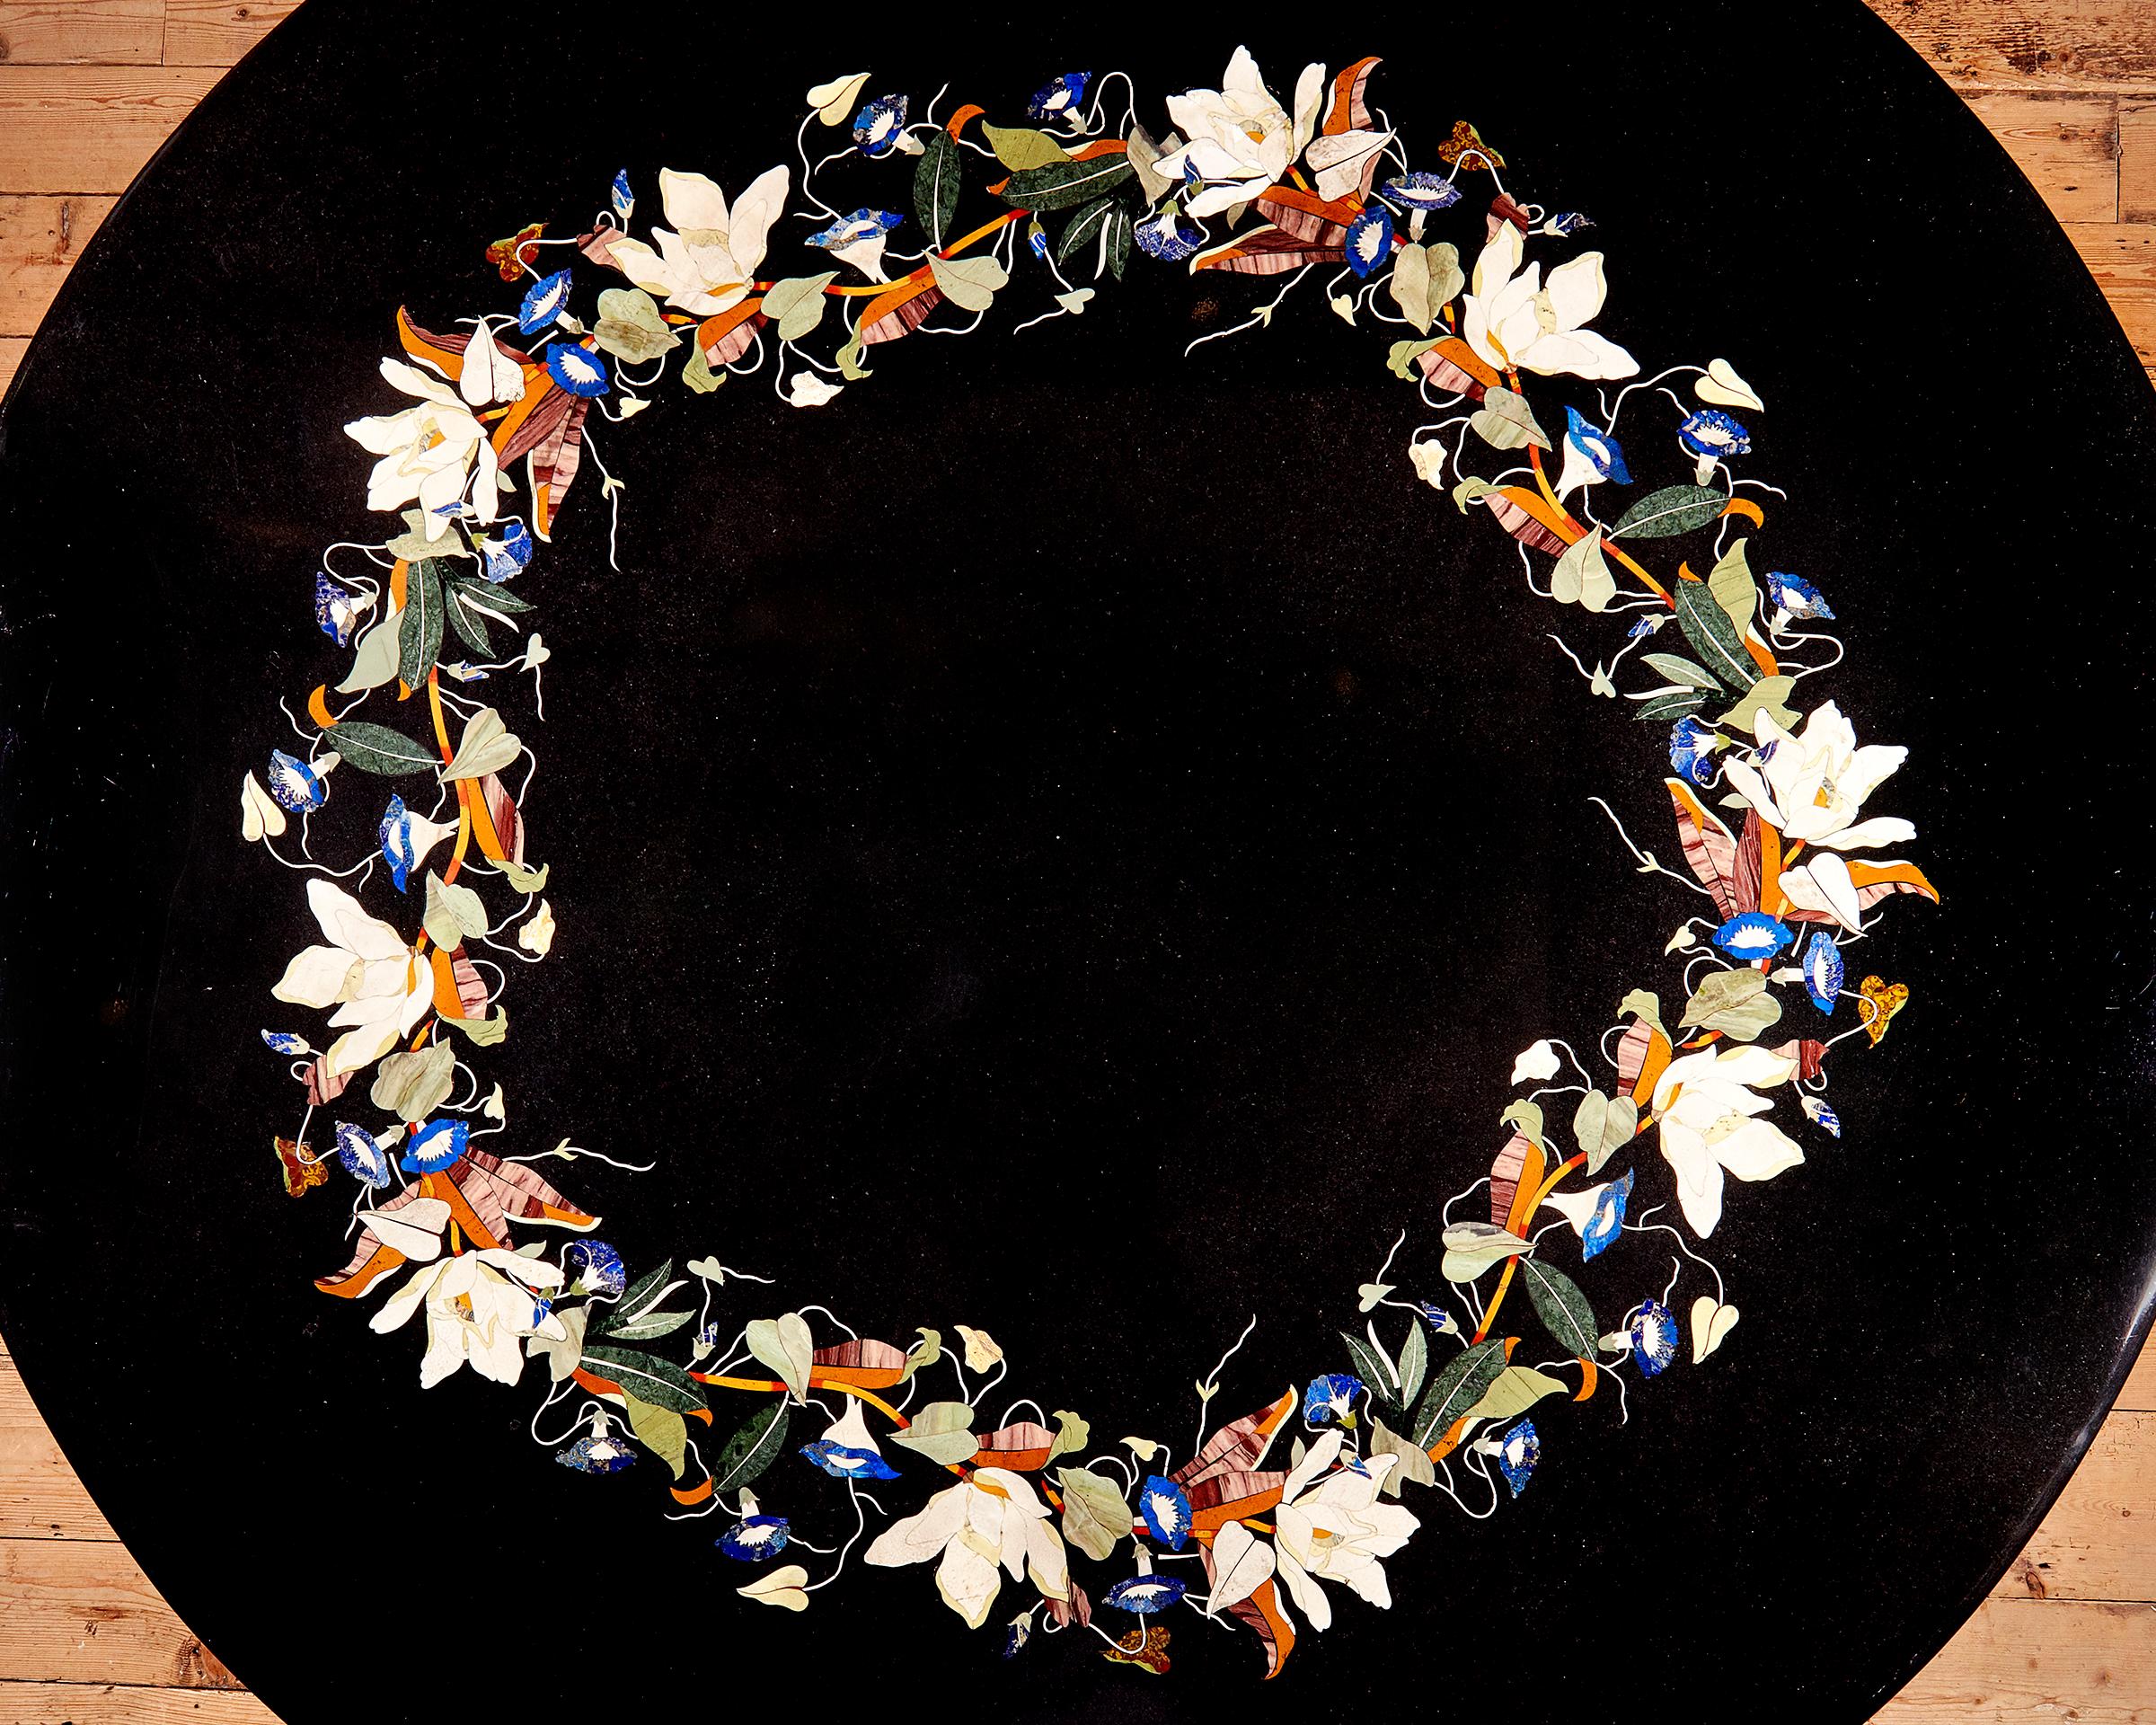 A large Italian Pietra Dura centre table, late 19th century, likely Florentine. The black marble top with an intricate inlaid polychrome trailing floral band, on a carved and painted wood central support in neoclassical style.